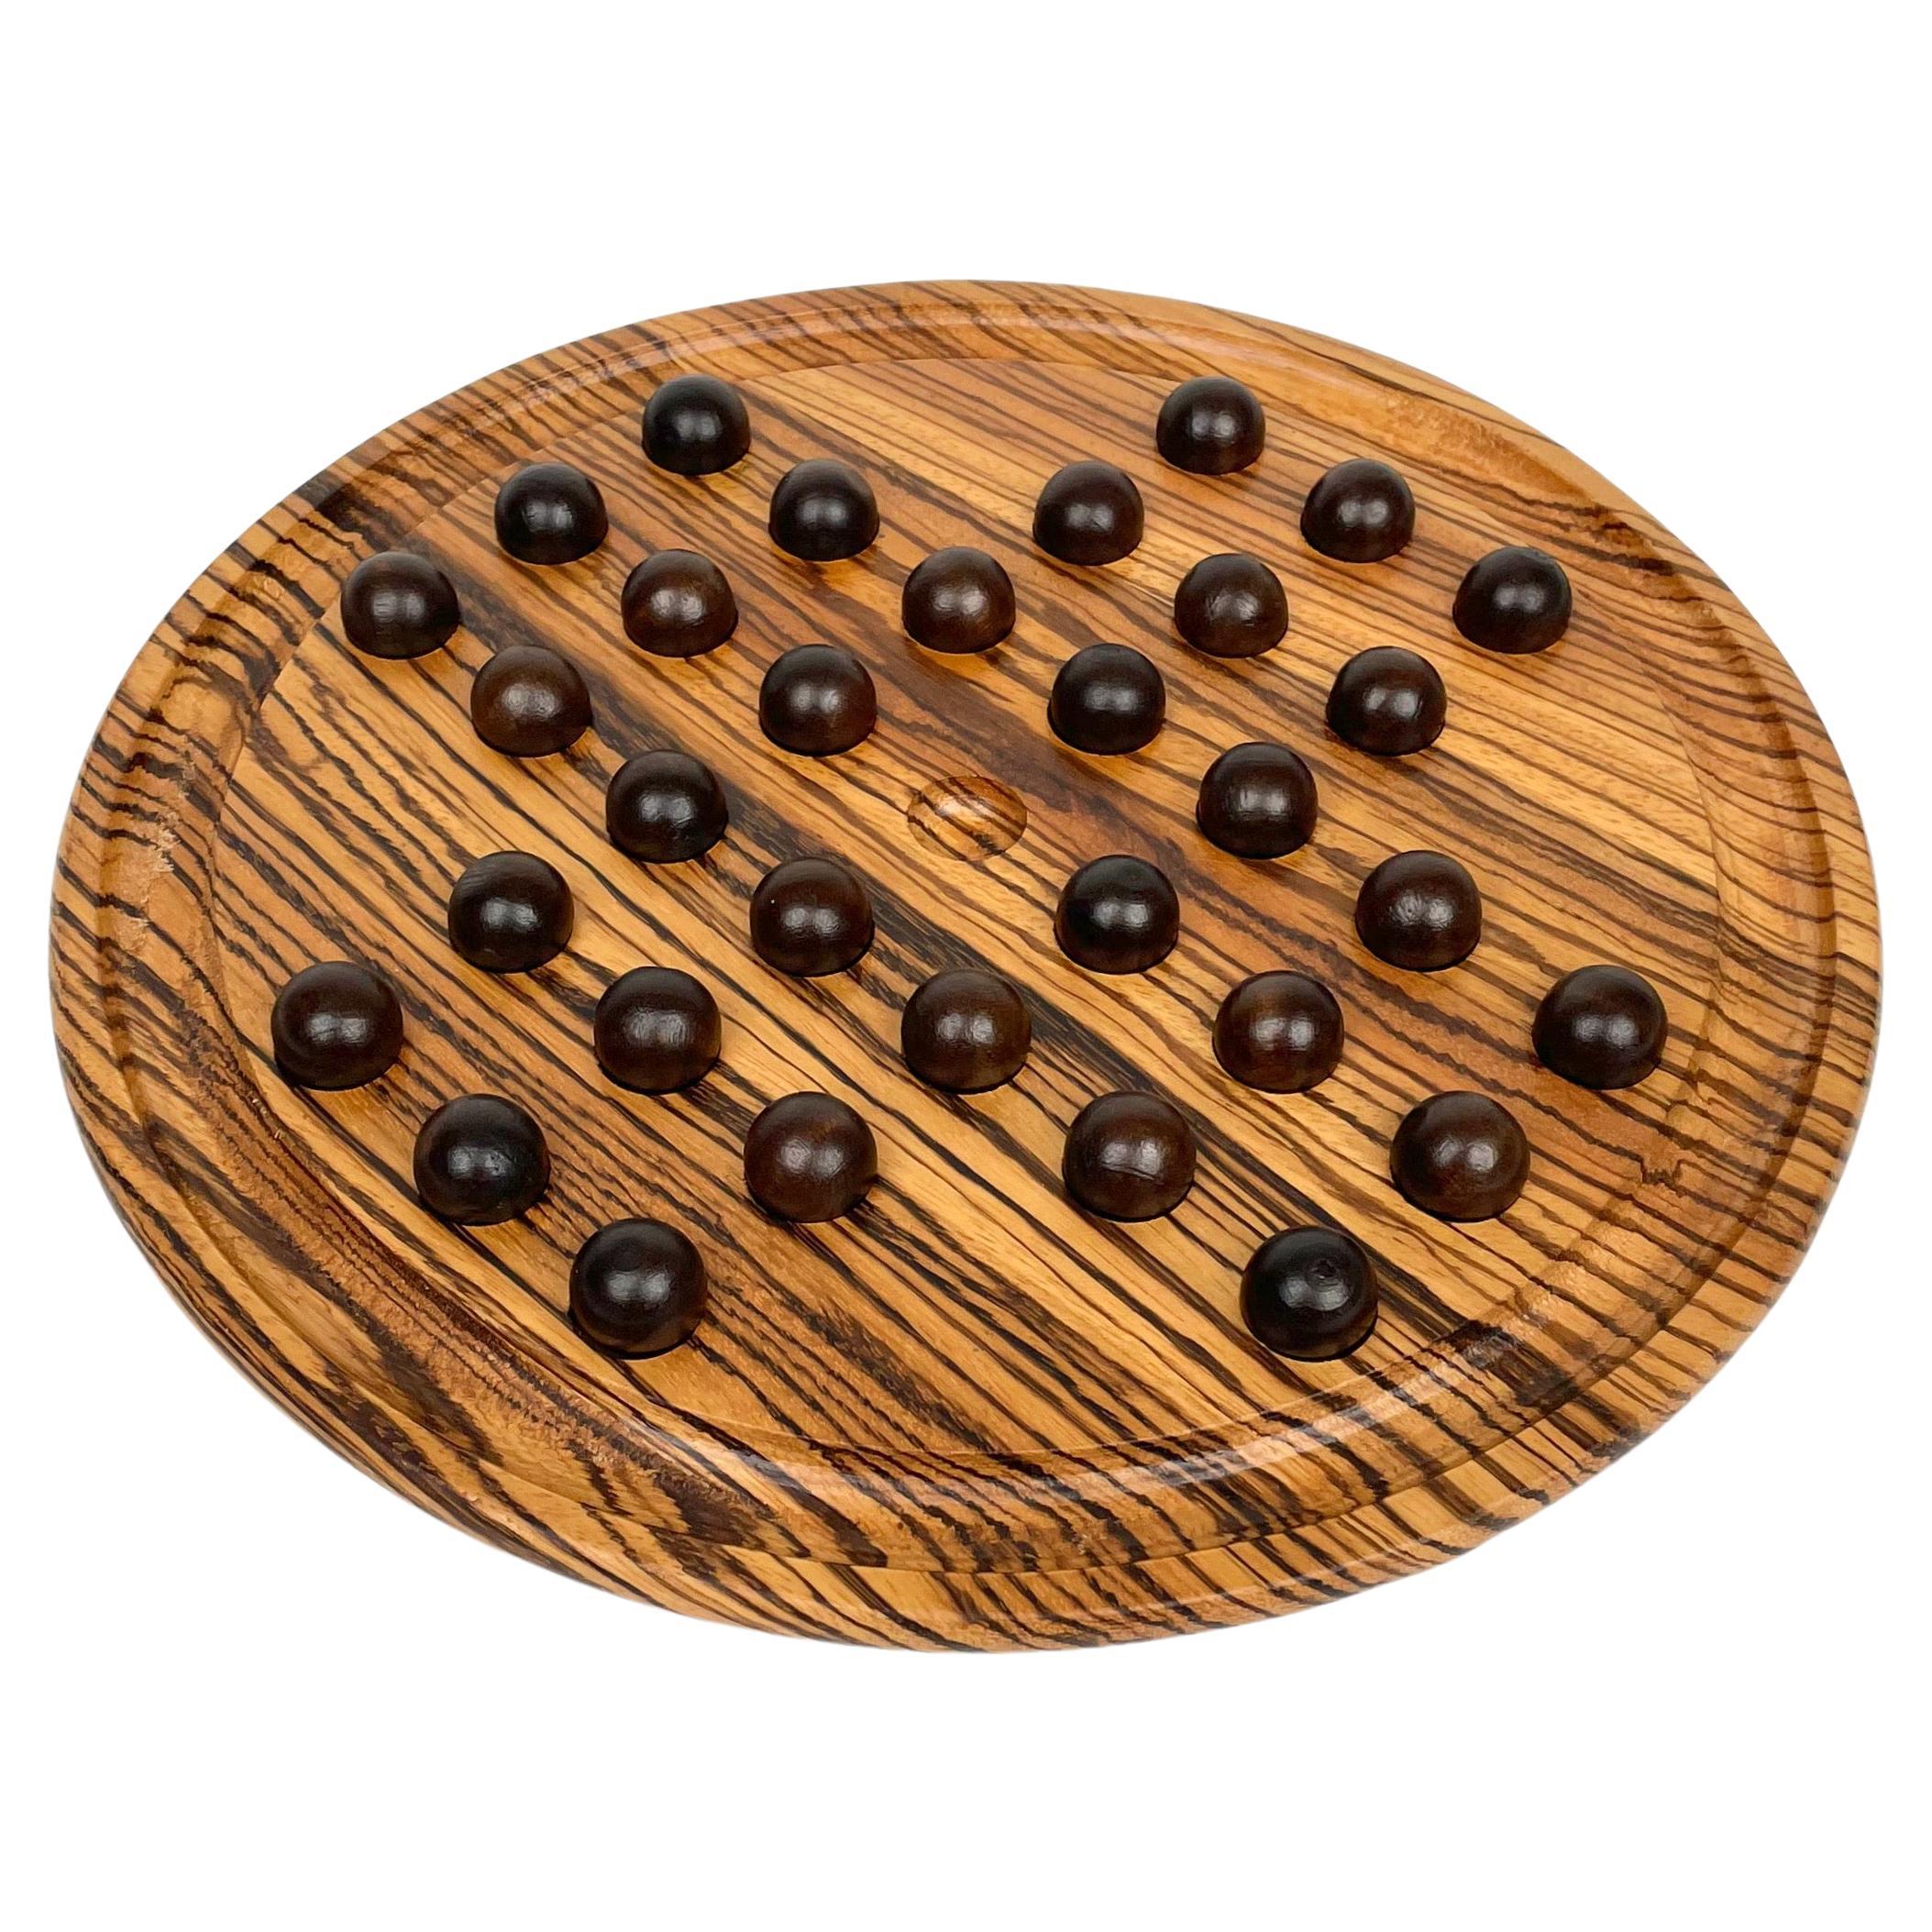 Checkers Game "The Solitaire" in Wood by Artek, Italy, 1970s For Sale